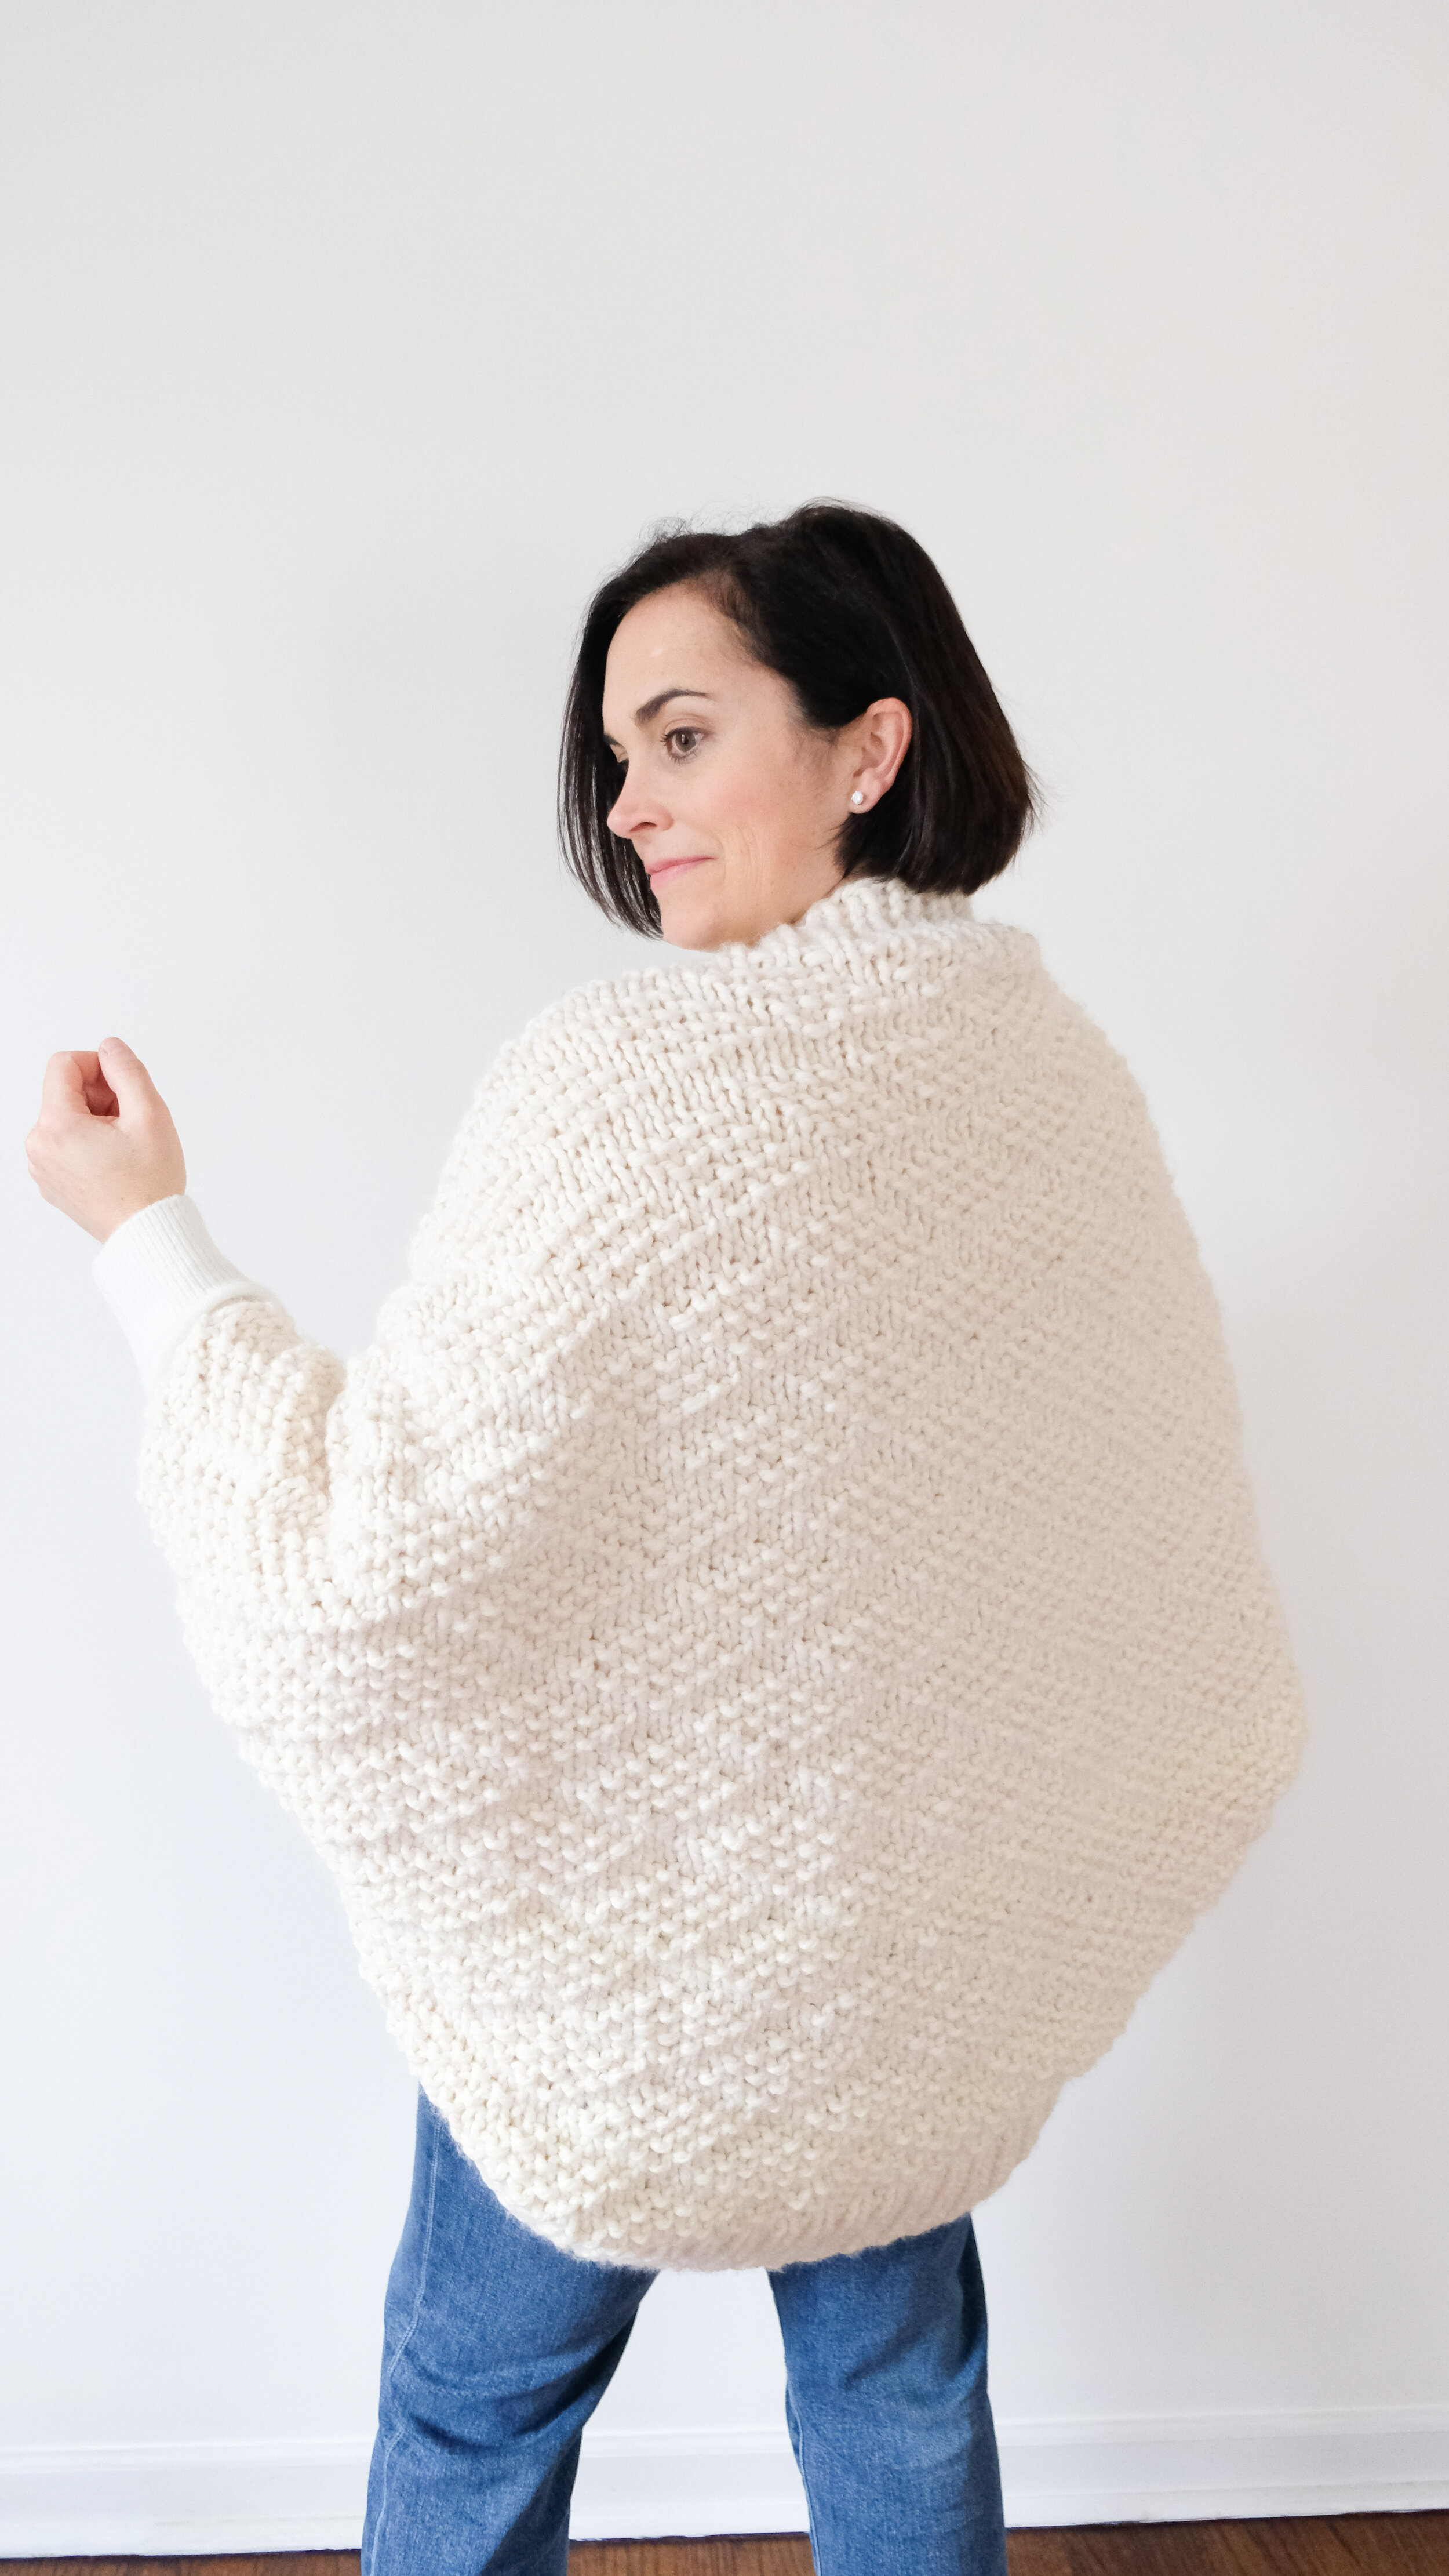 How To Knit A Cocoon Cardigan?